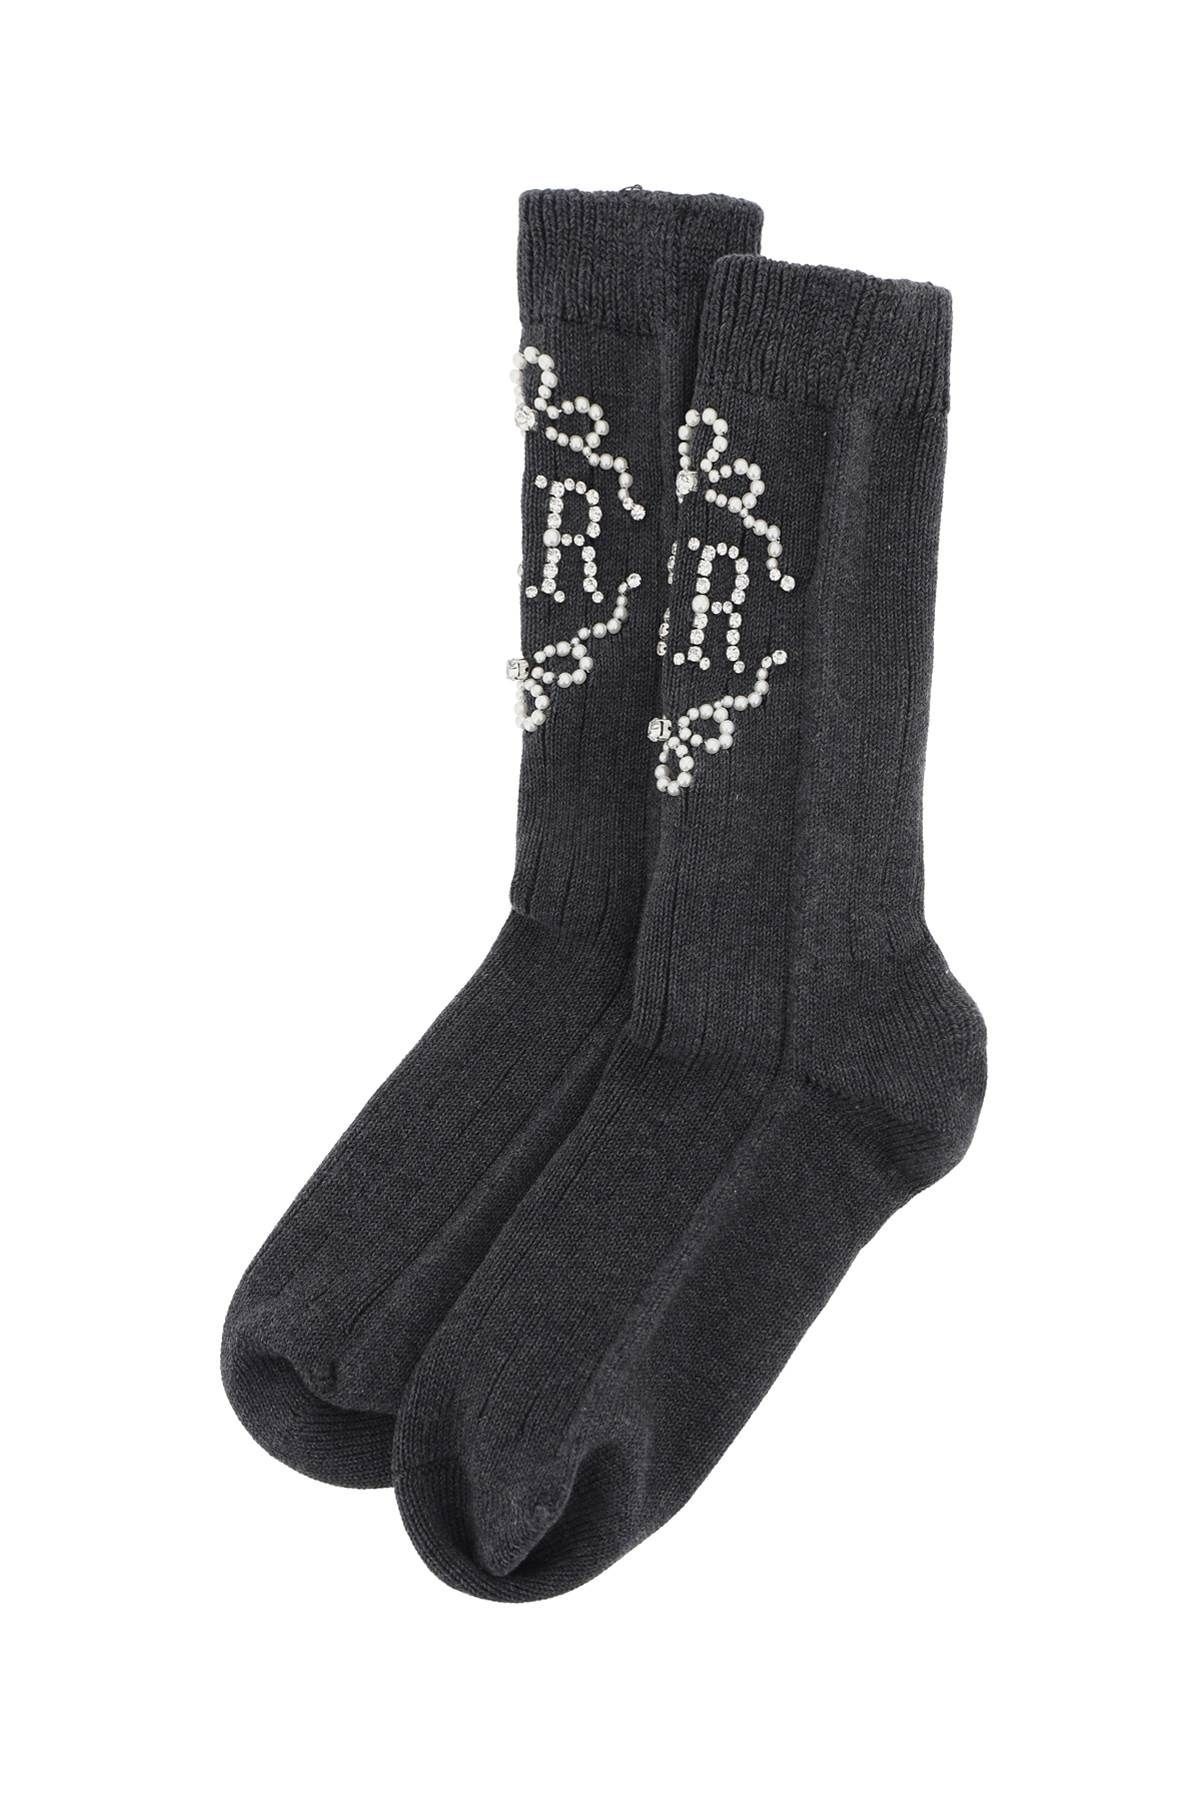 SR SOCKS WITH PEARLS AND CRYSTALS - 2